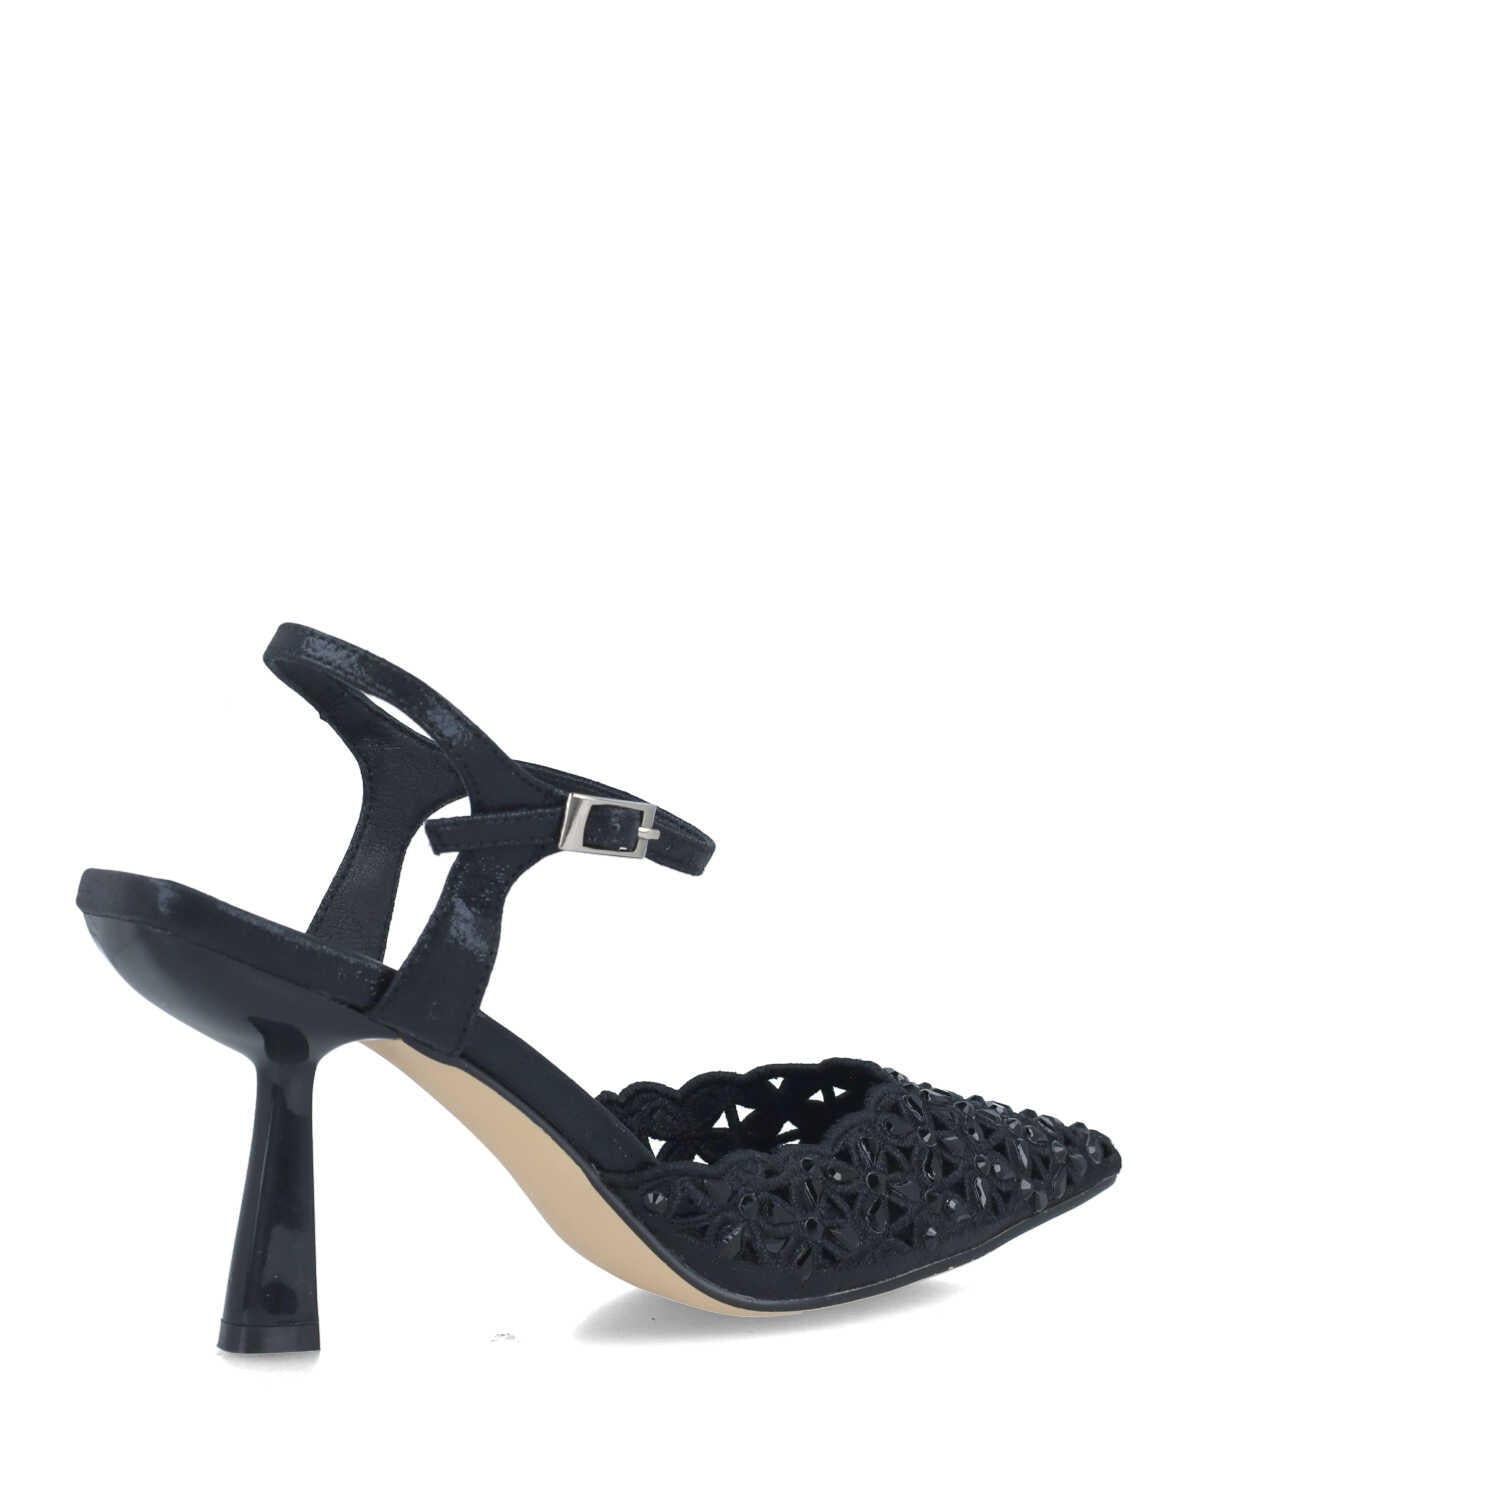 Black Pumps With Ankle Strap_24724_01_03